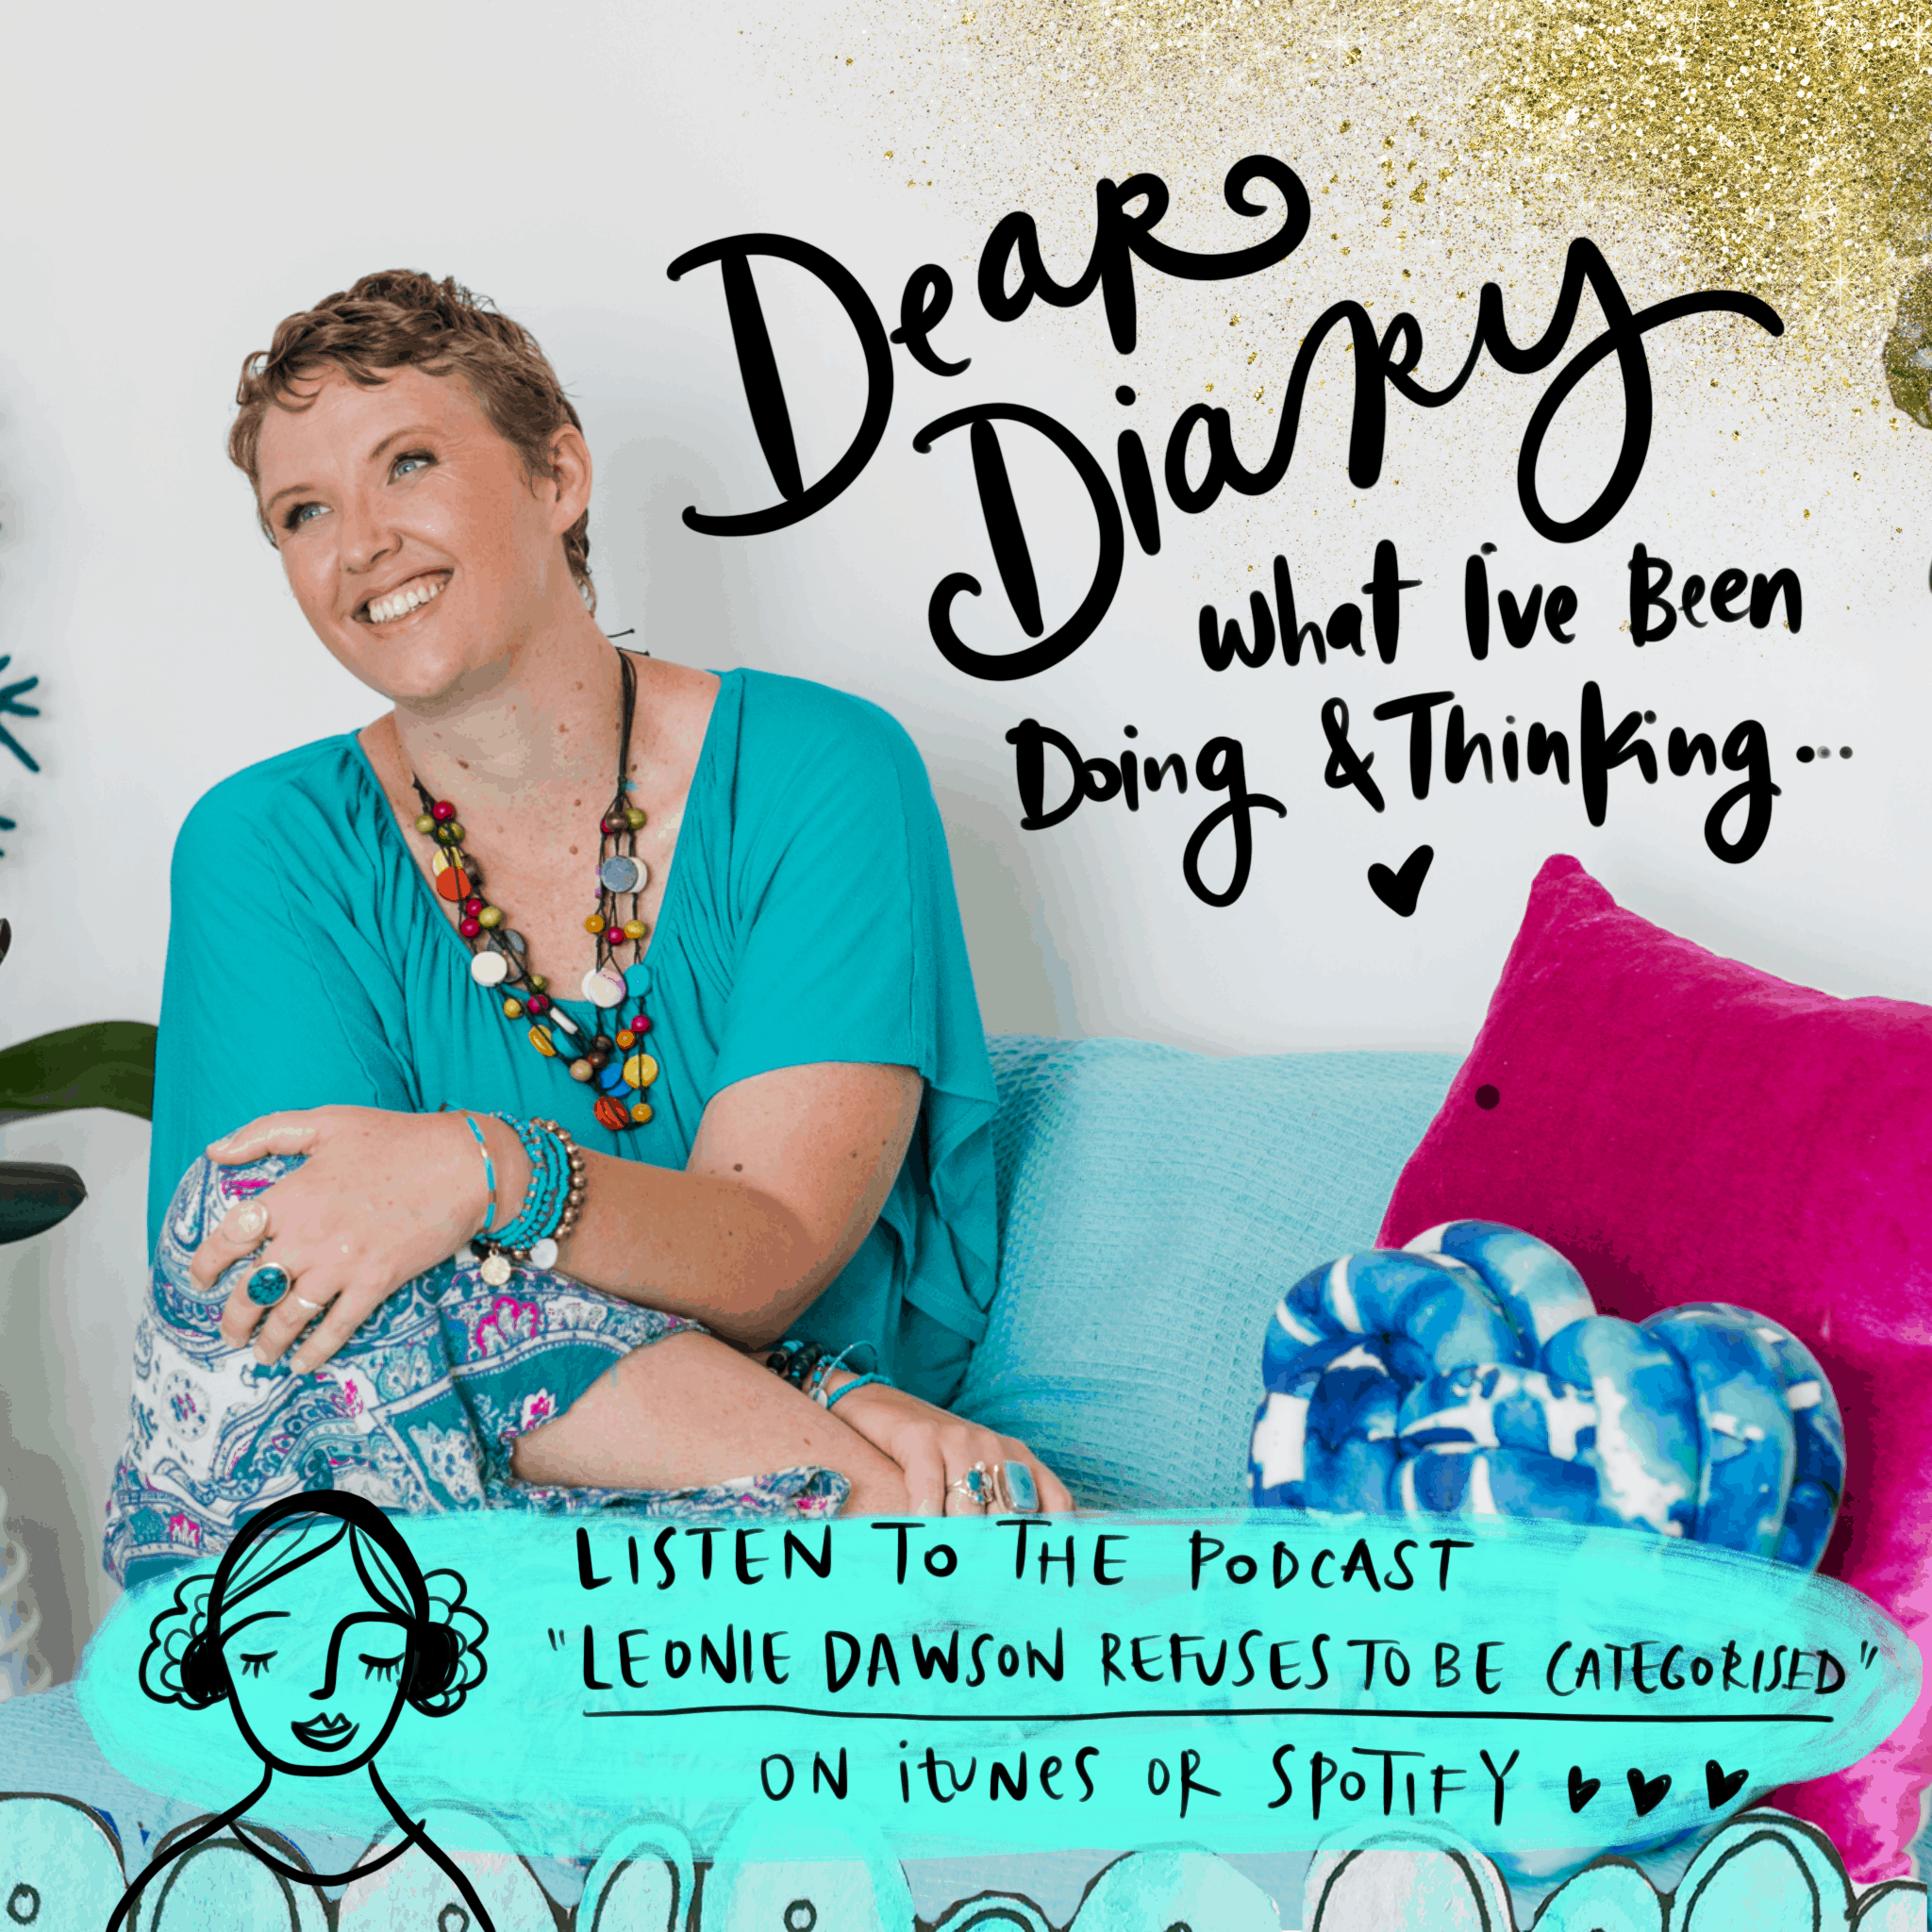 Podcast: Dear Diary... What I've Been Doing and Thinking